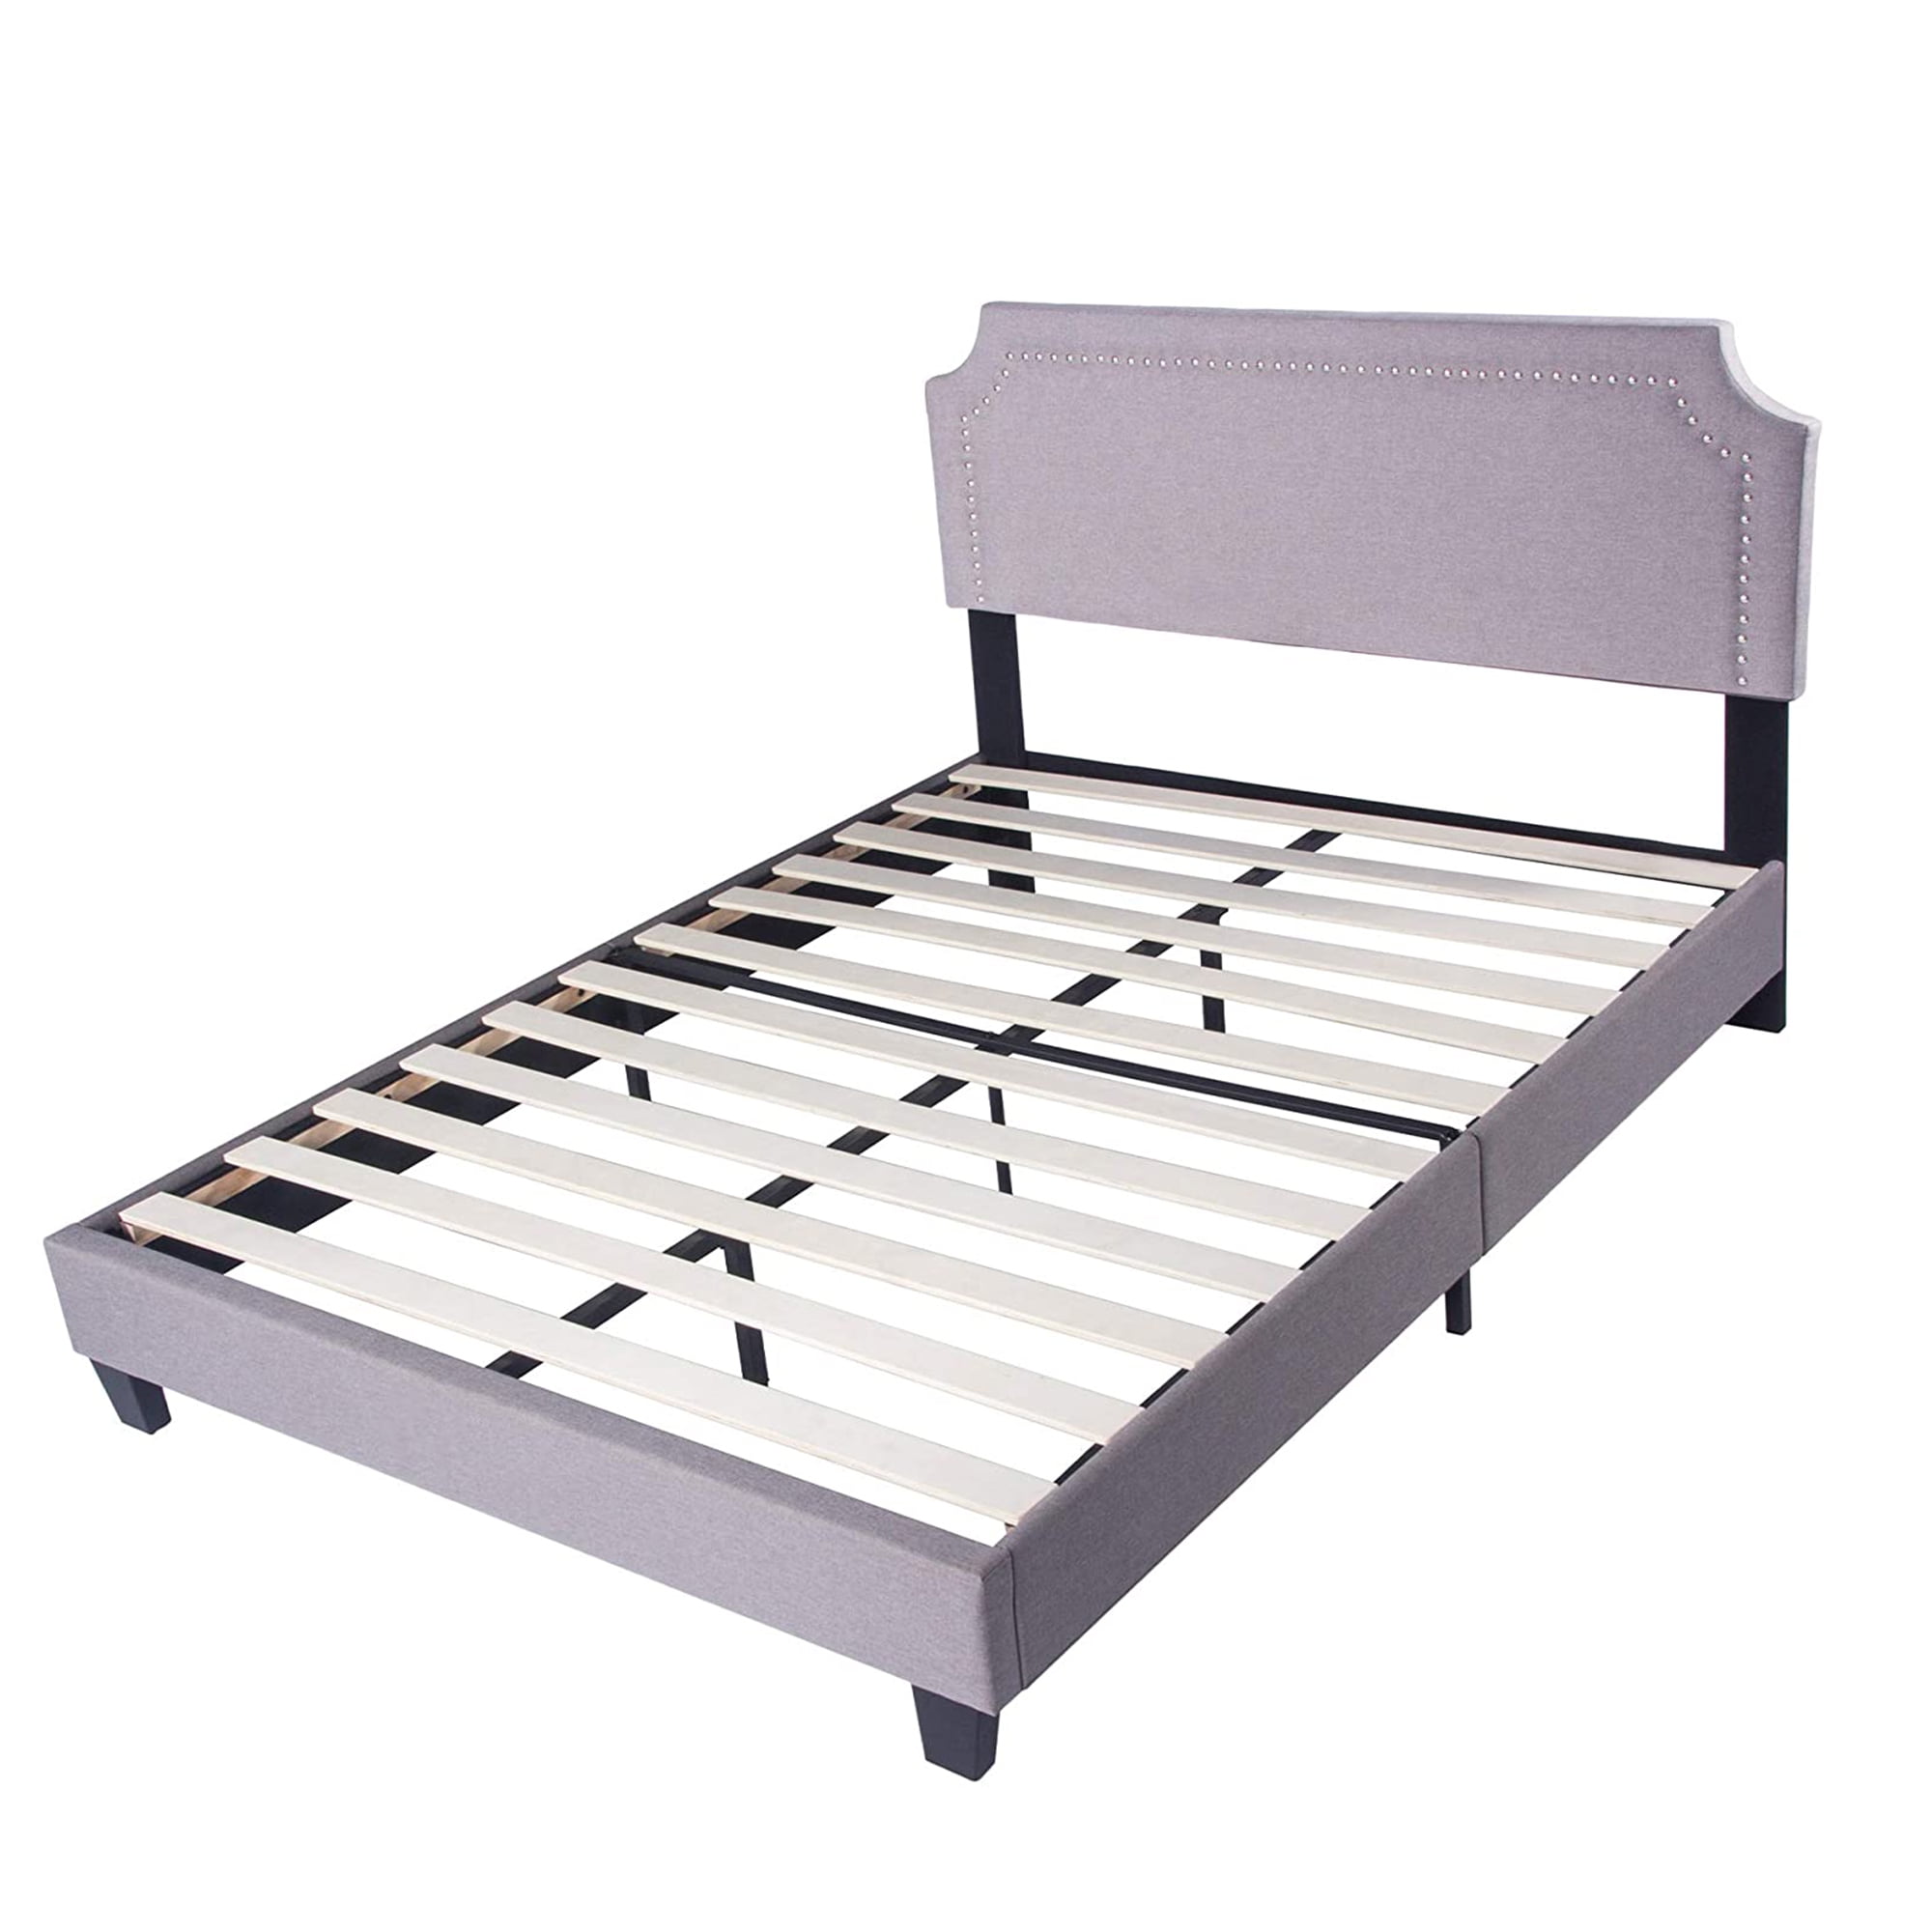 Replaces Boxspring Choices of Sizes! Boyd Sleek Support Wood Slat Platform Bed 